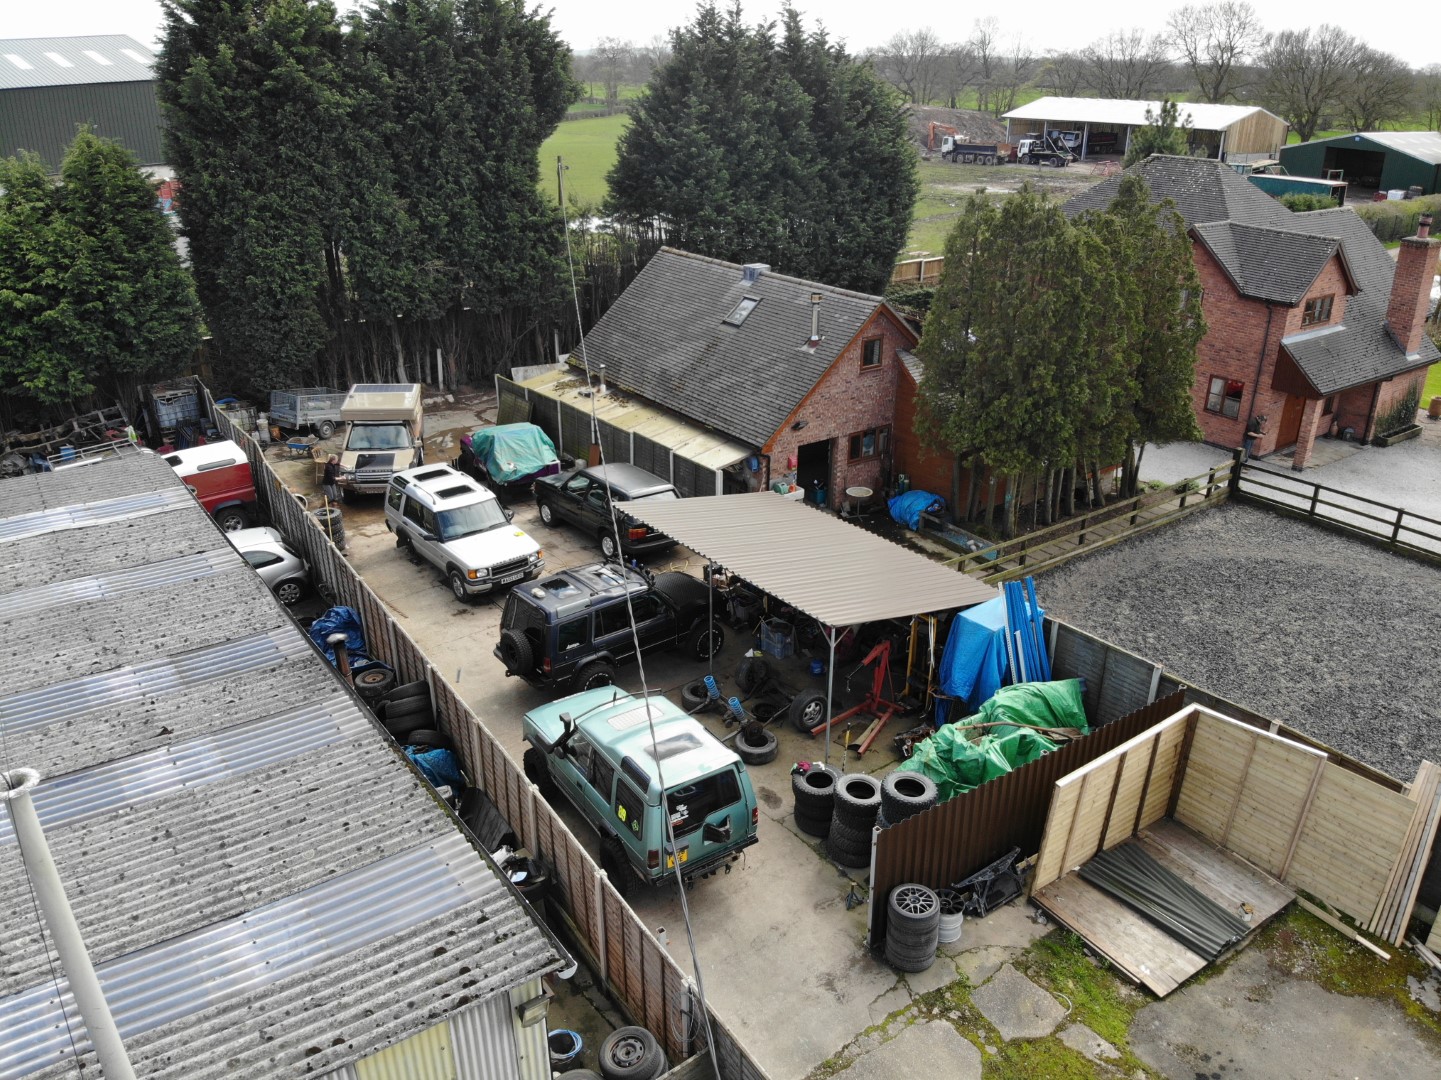 A gaggle of Land Rovers in a yard